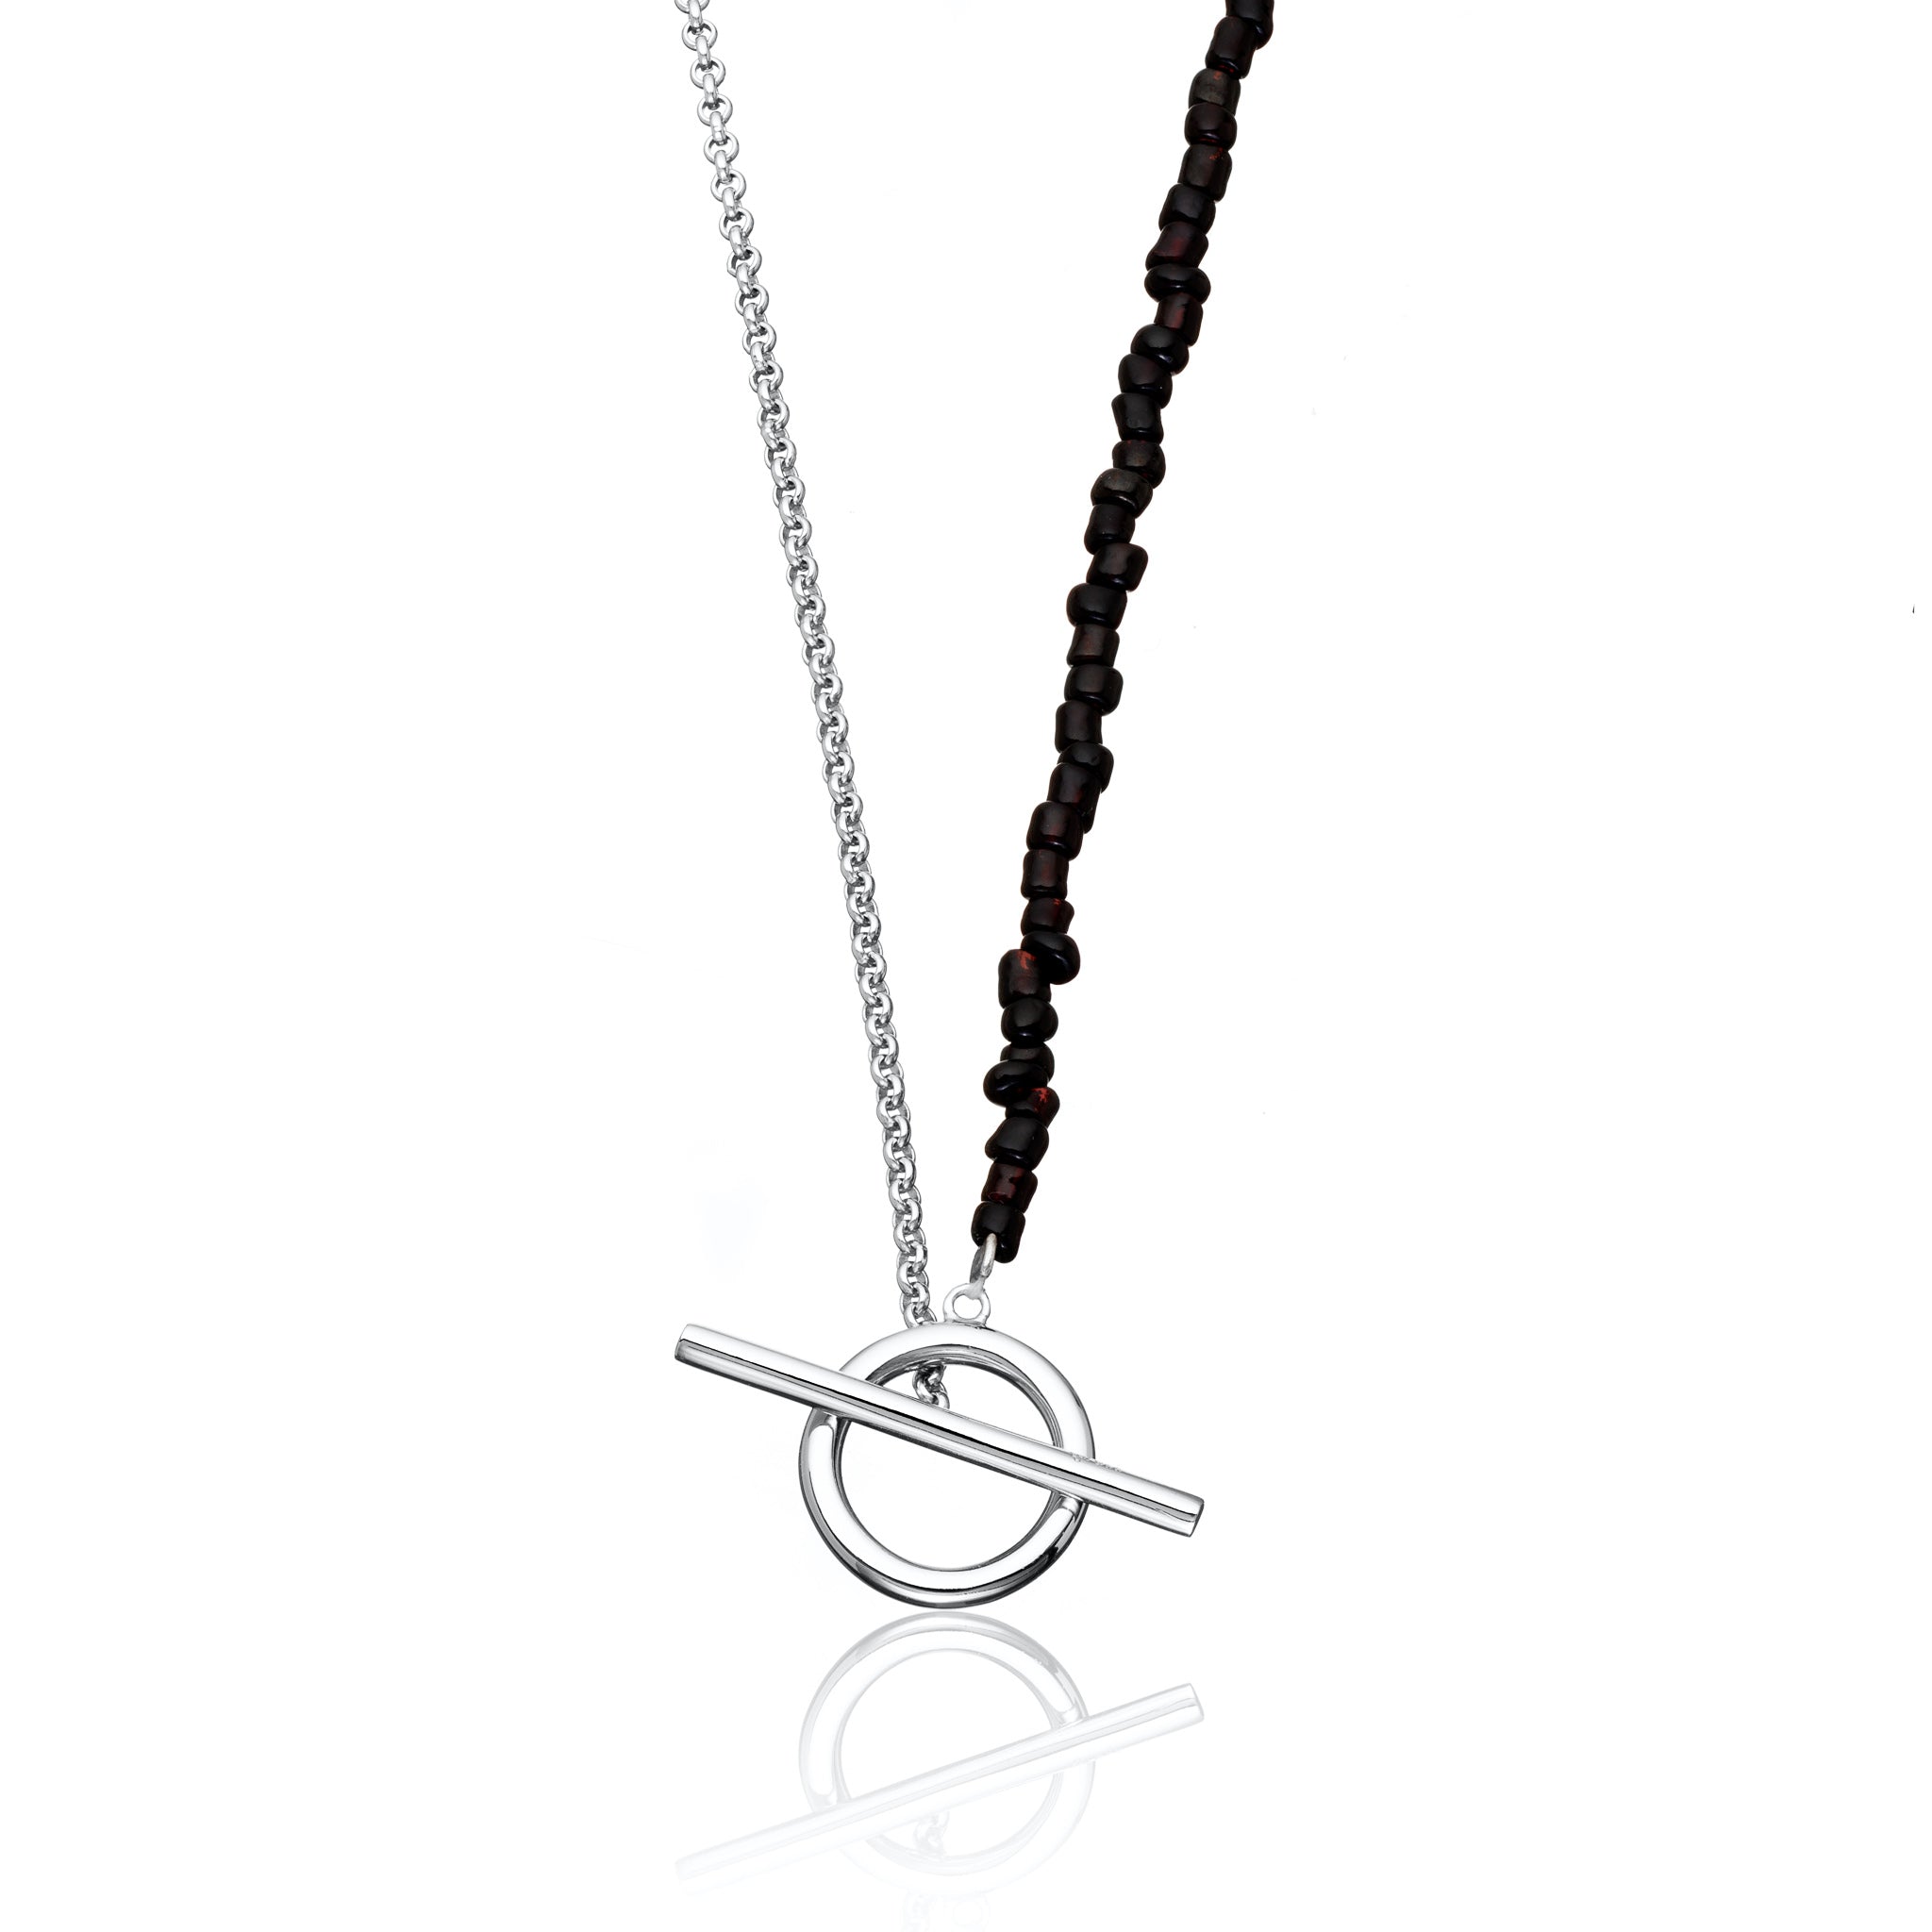 Black Bead and Chain T-Bar Necklace